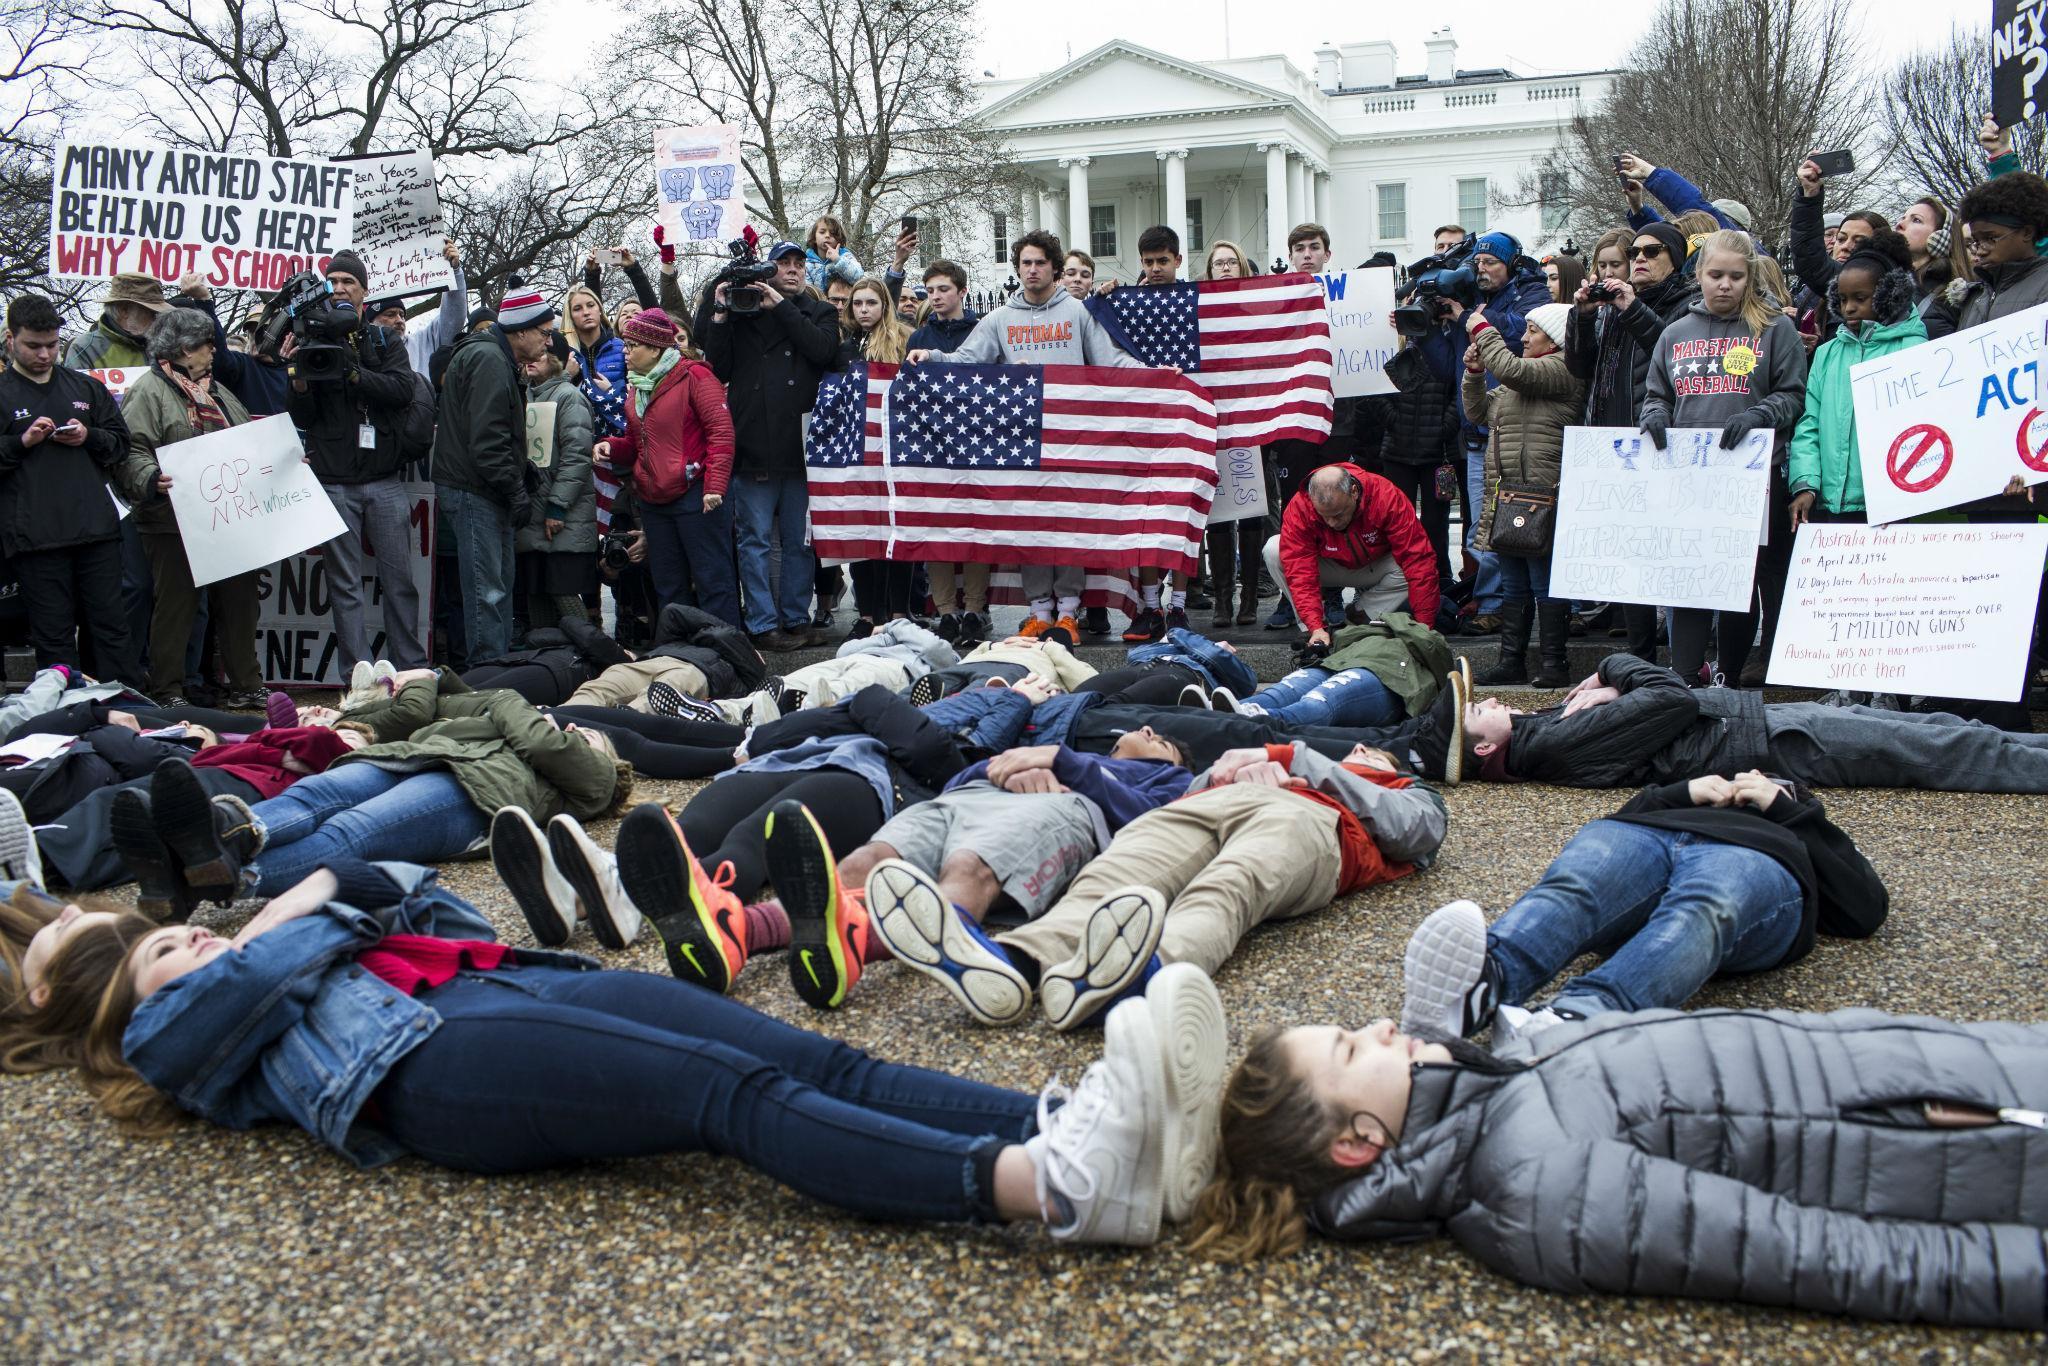 Teenagers stage a 'lie-in' demonstration supporting gun control reform near the White House